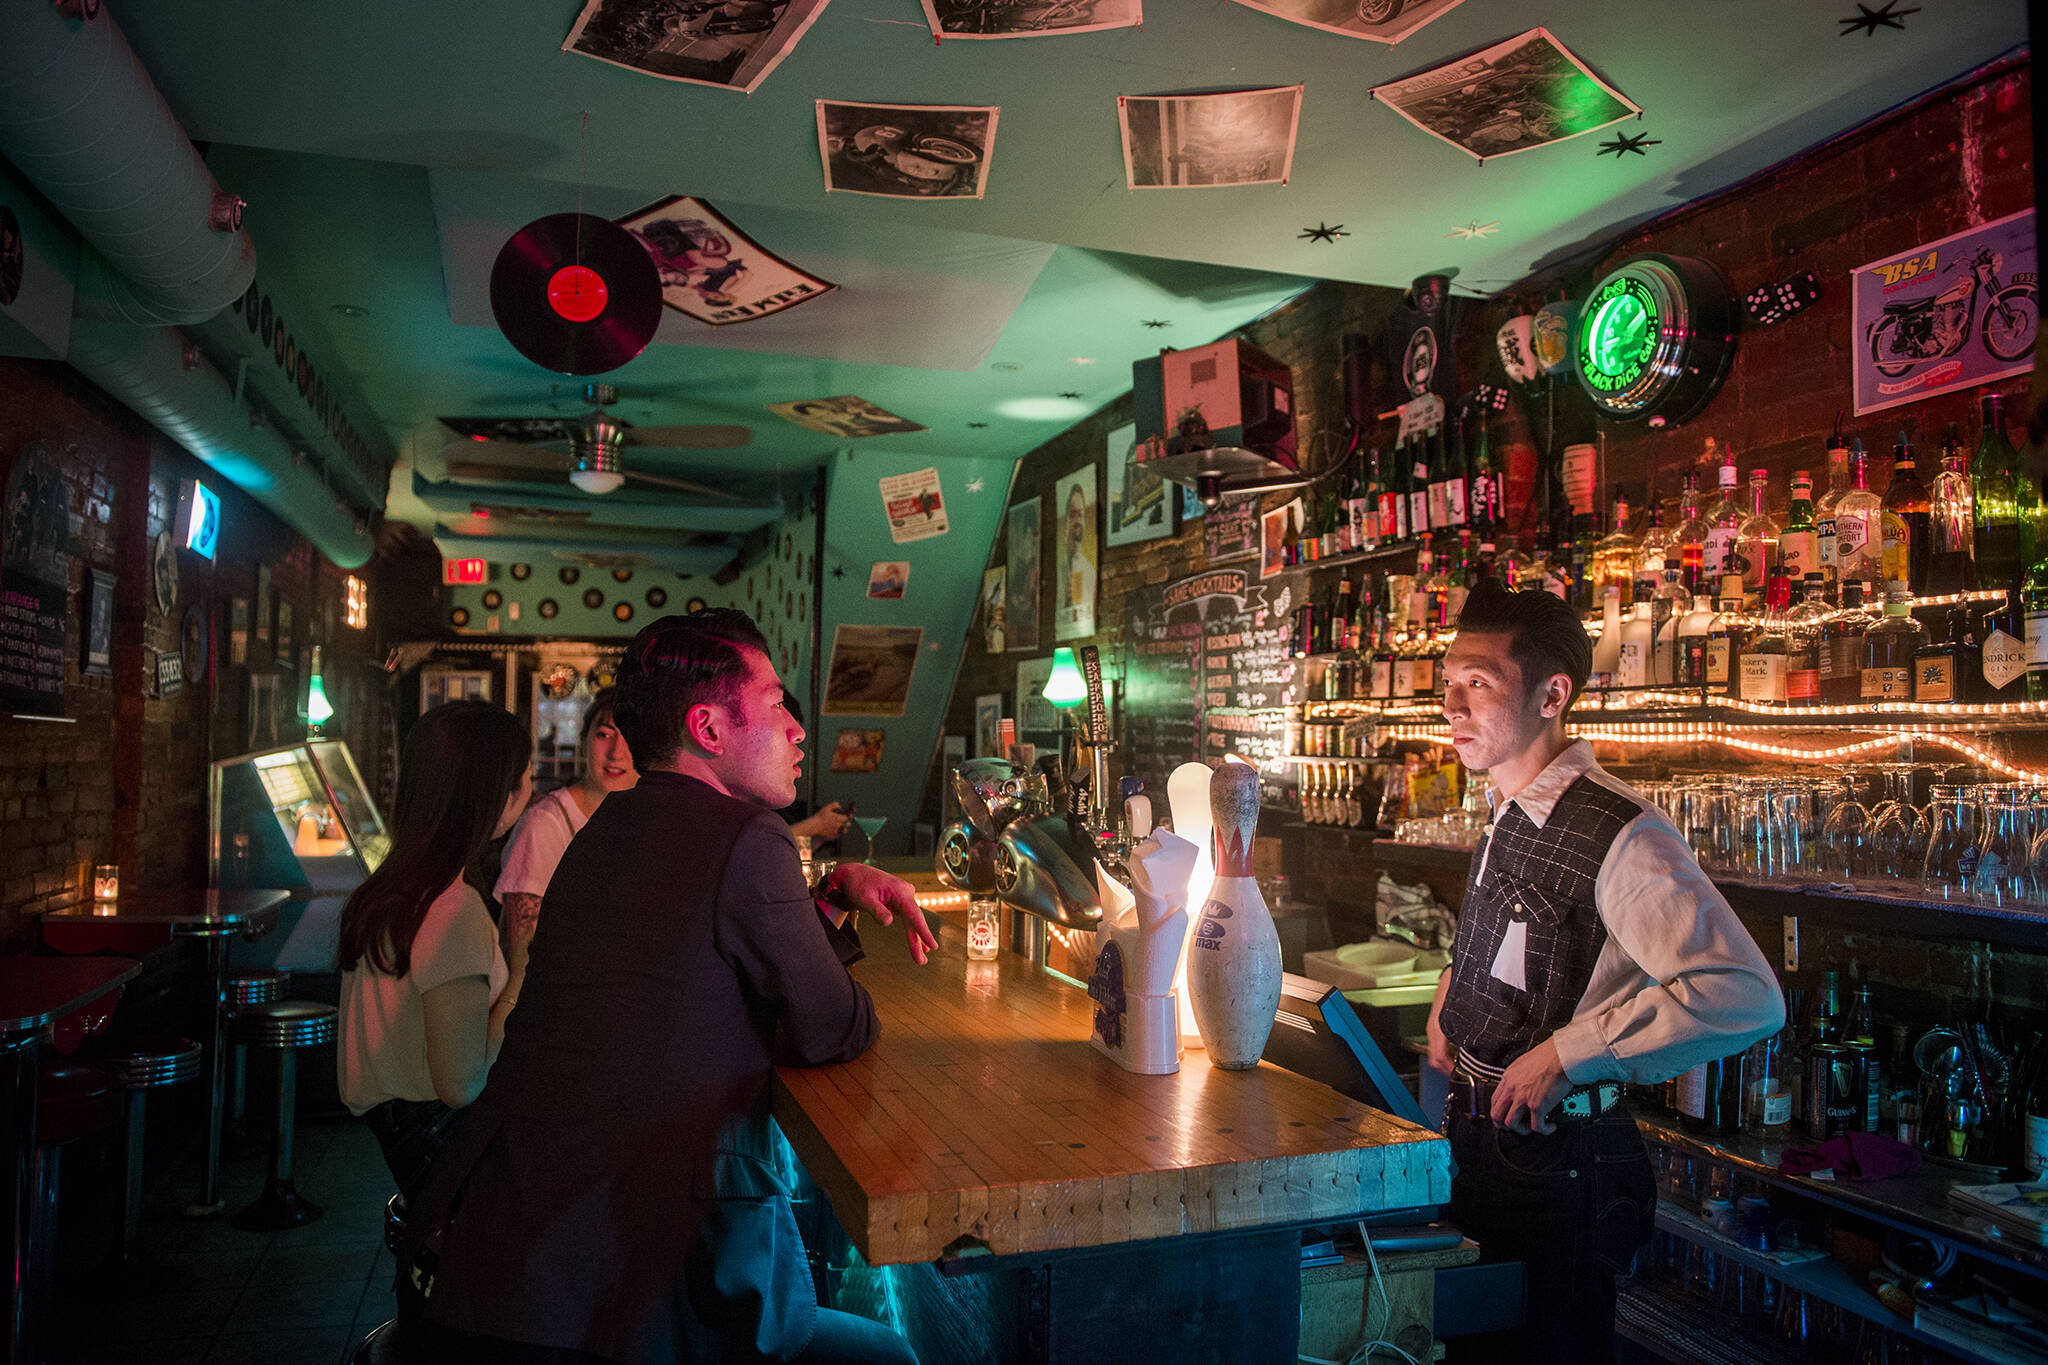 The top 50 bars in Toronto